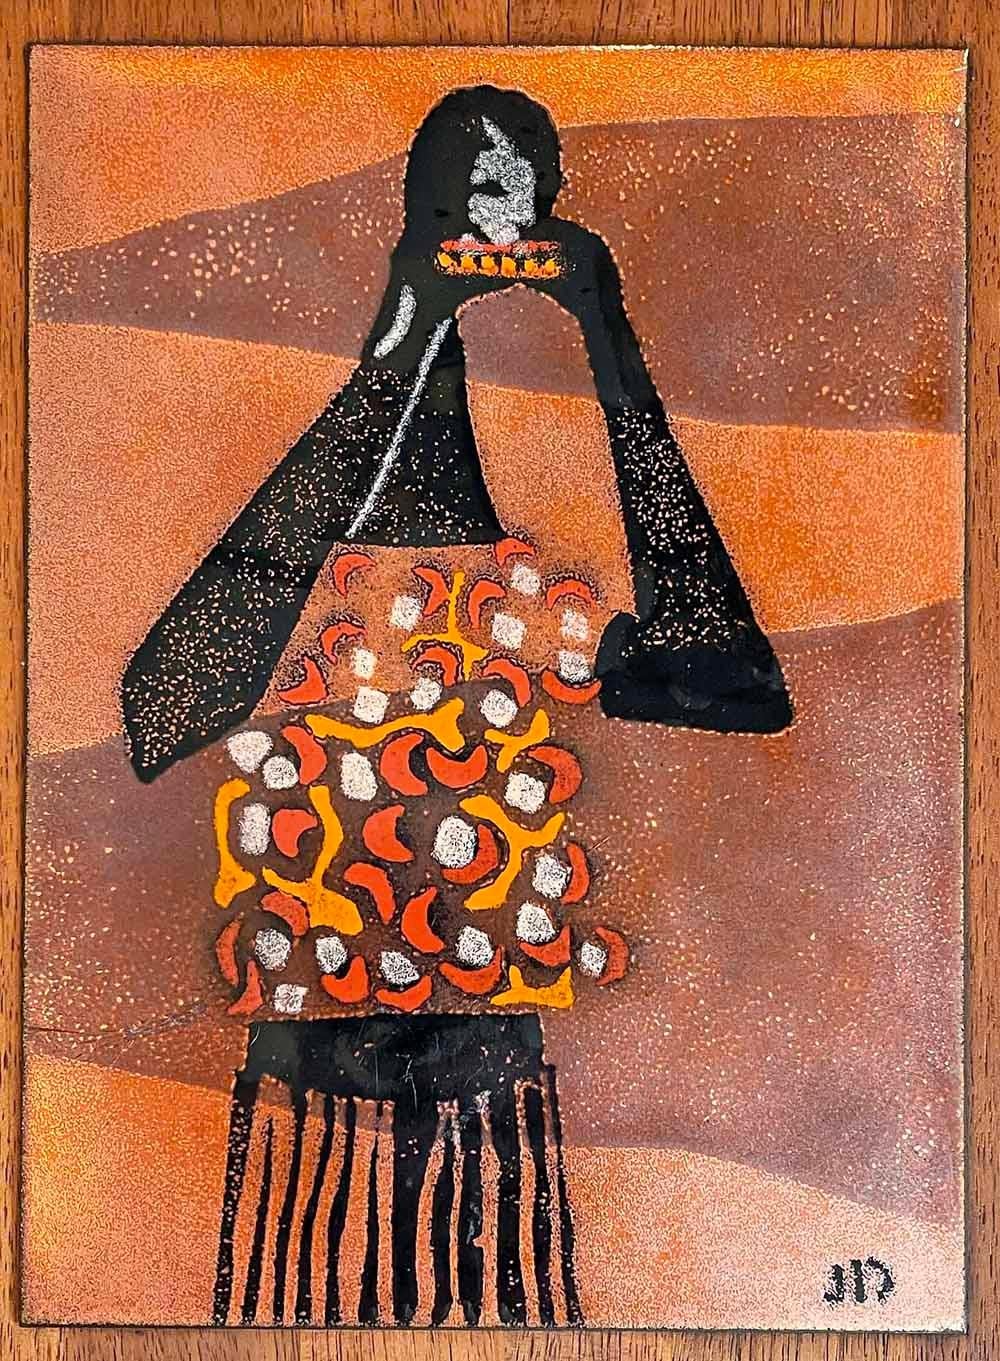 Beautifully made by the last of America's great Mid Century enamel artists, this panel depicts a Black female figure in a resplendent shirt that is alive with an abstract pattern in scarlet, orange and white, her arms akimbo and her body alive with